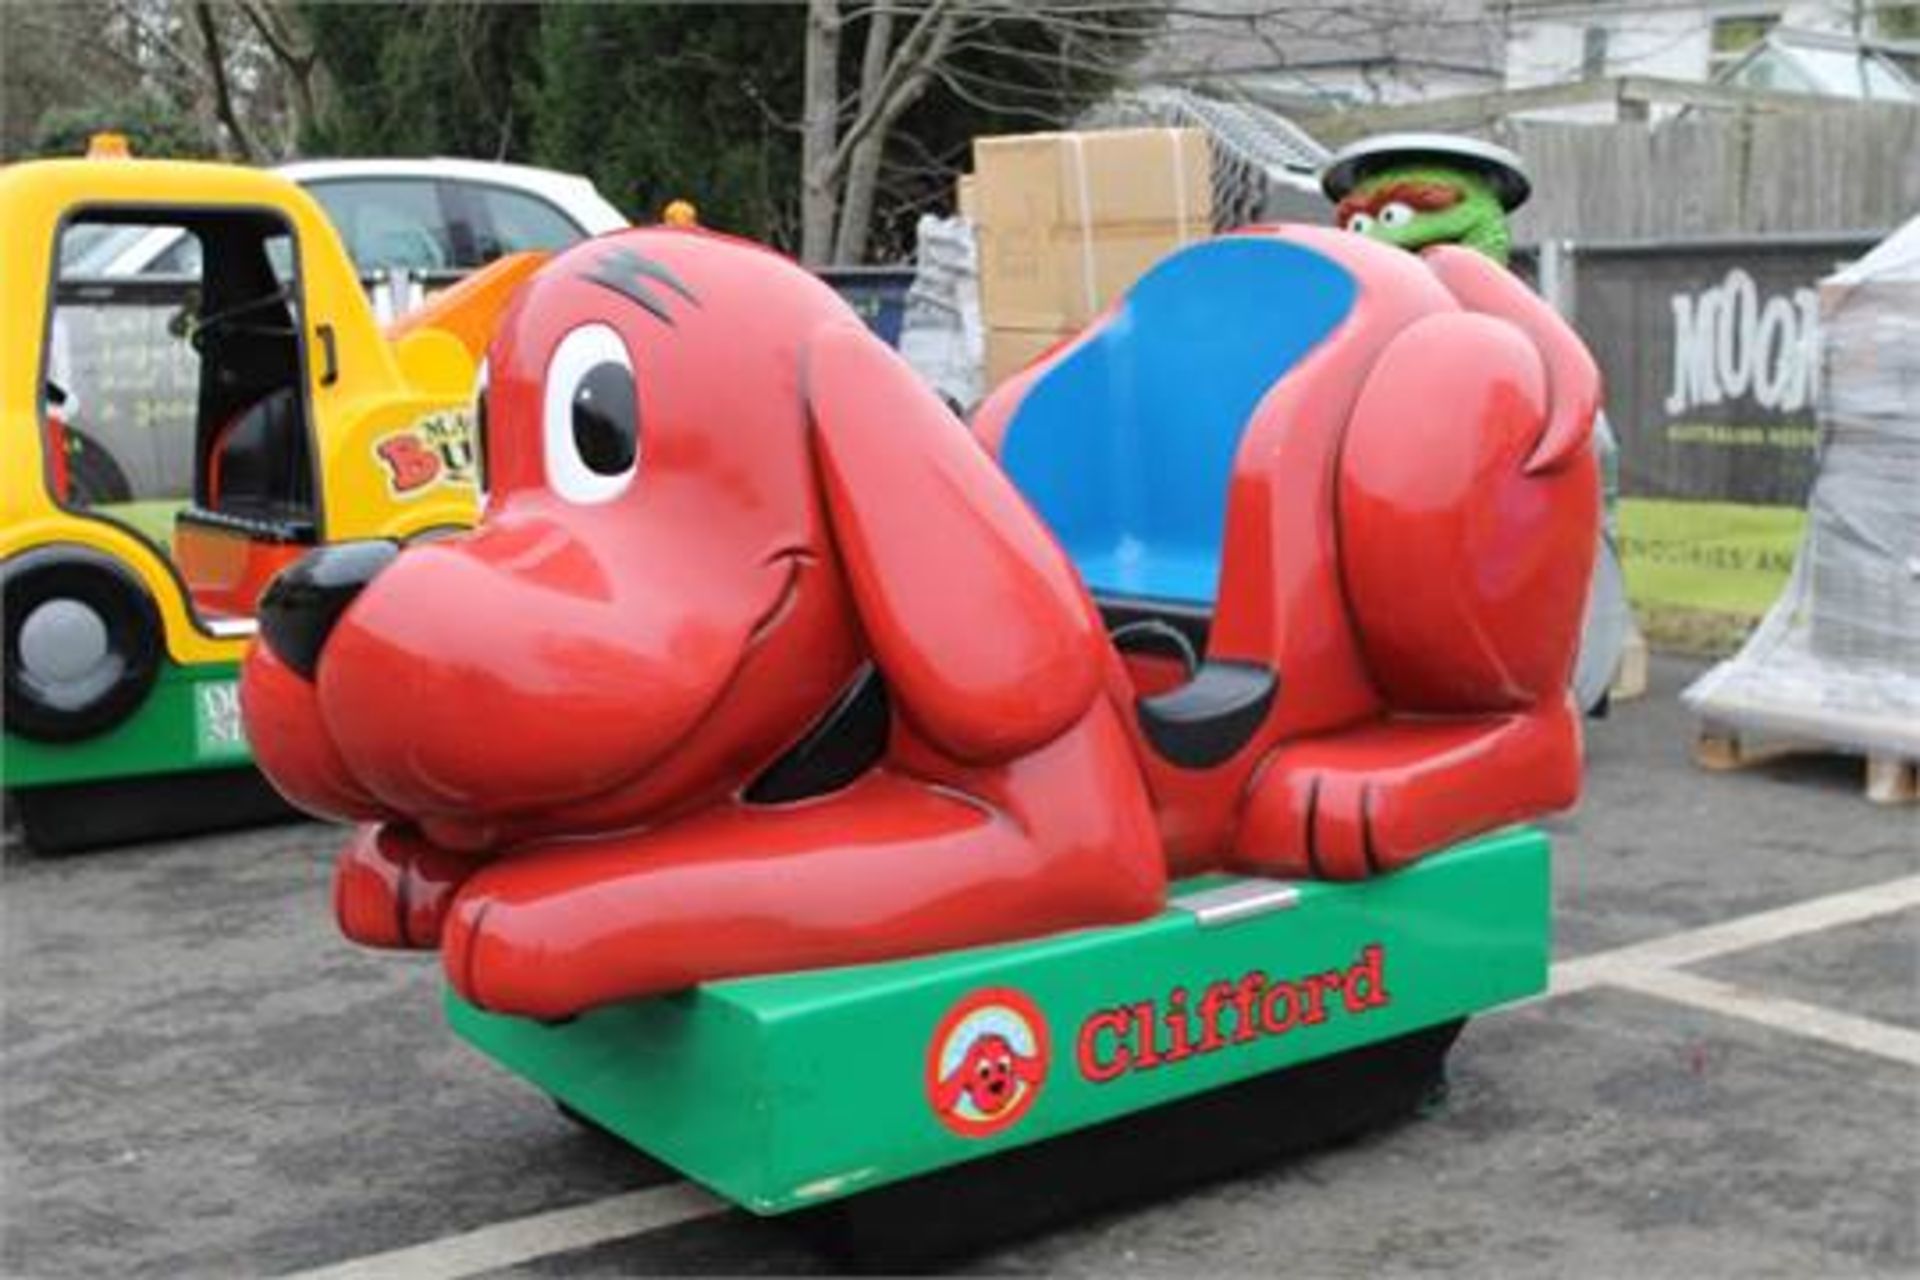 Clifford Child Ride - Image 2 of 2